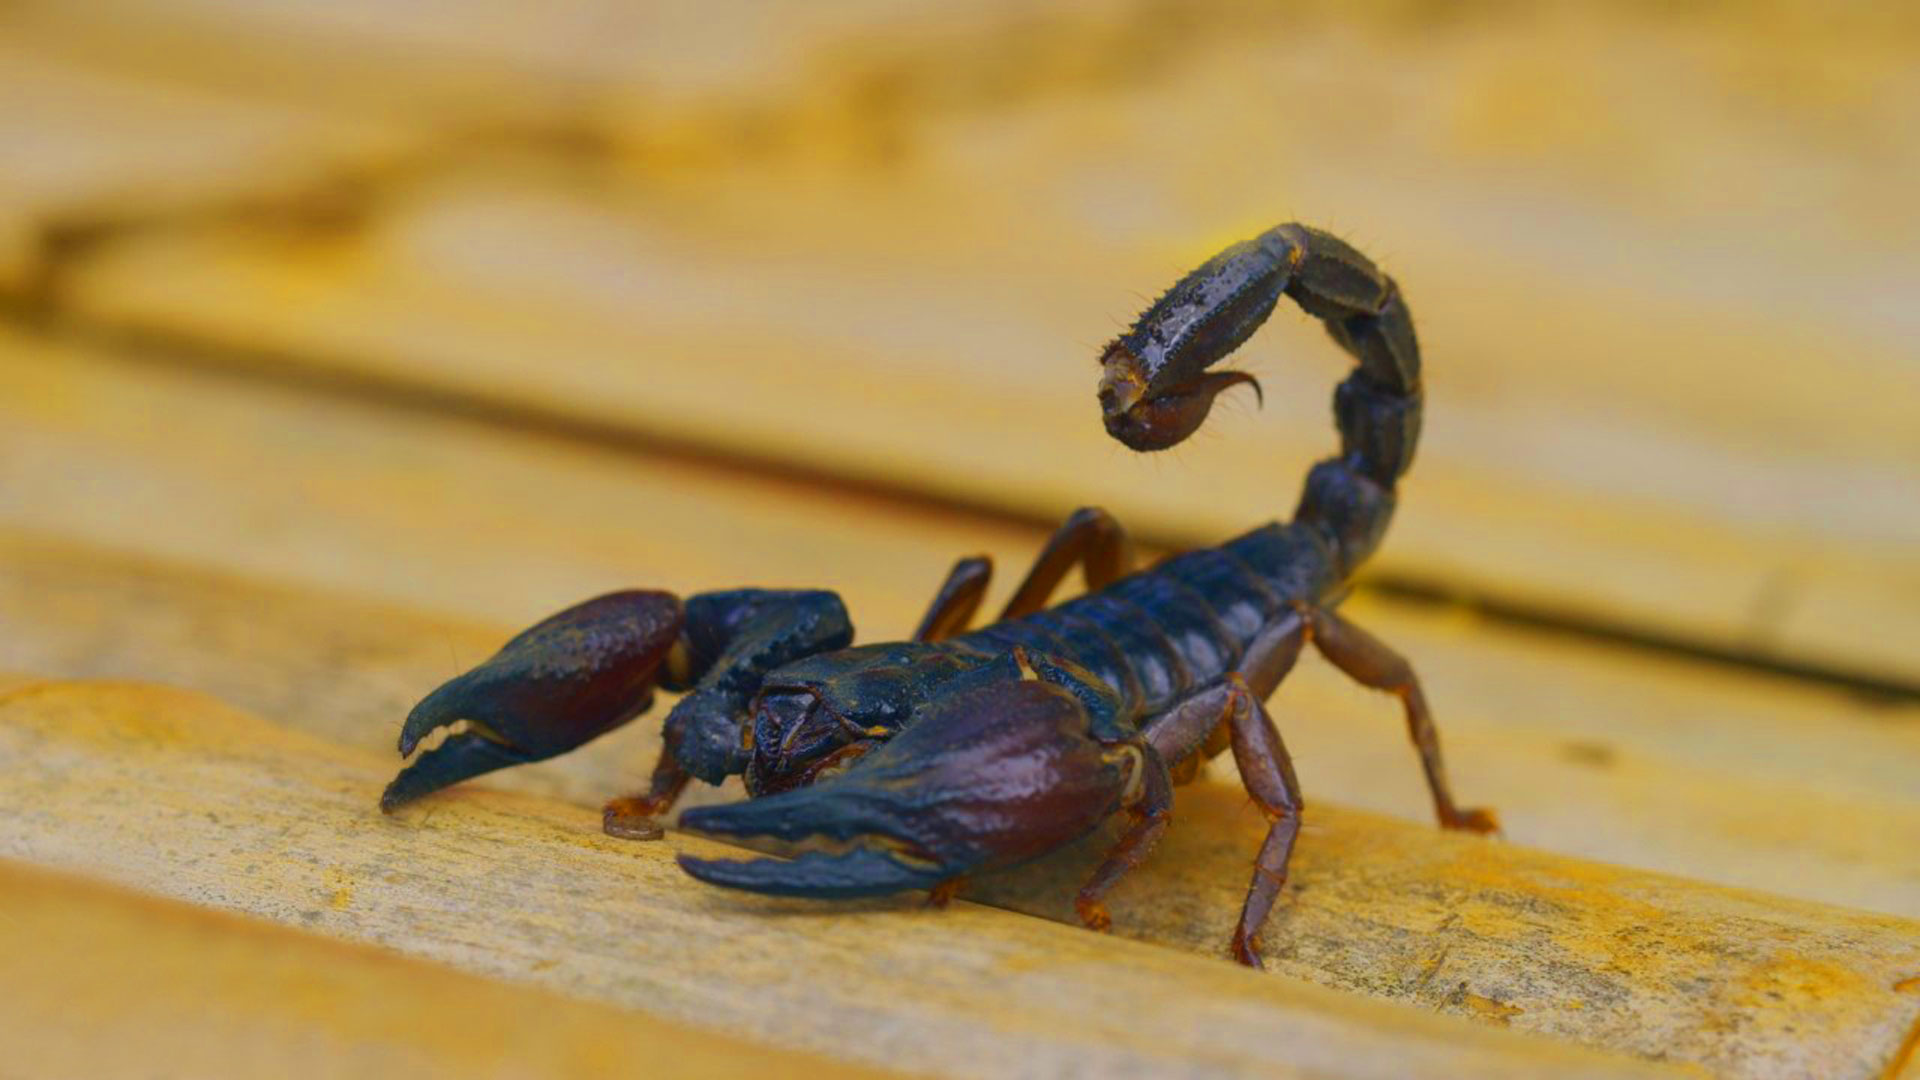 hd pics photos stunning attractive scorpion insects macro new hd ...